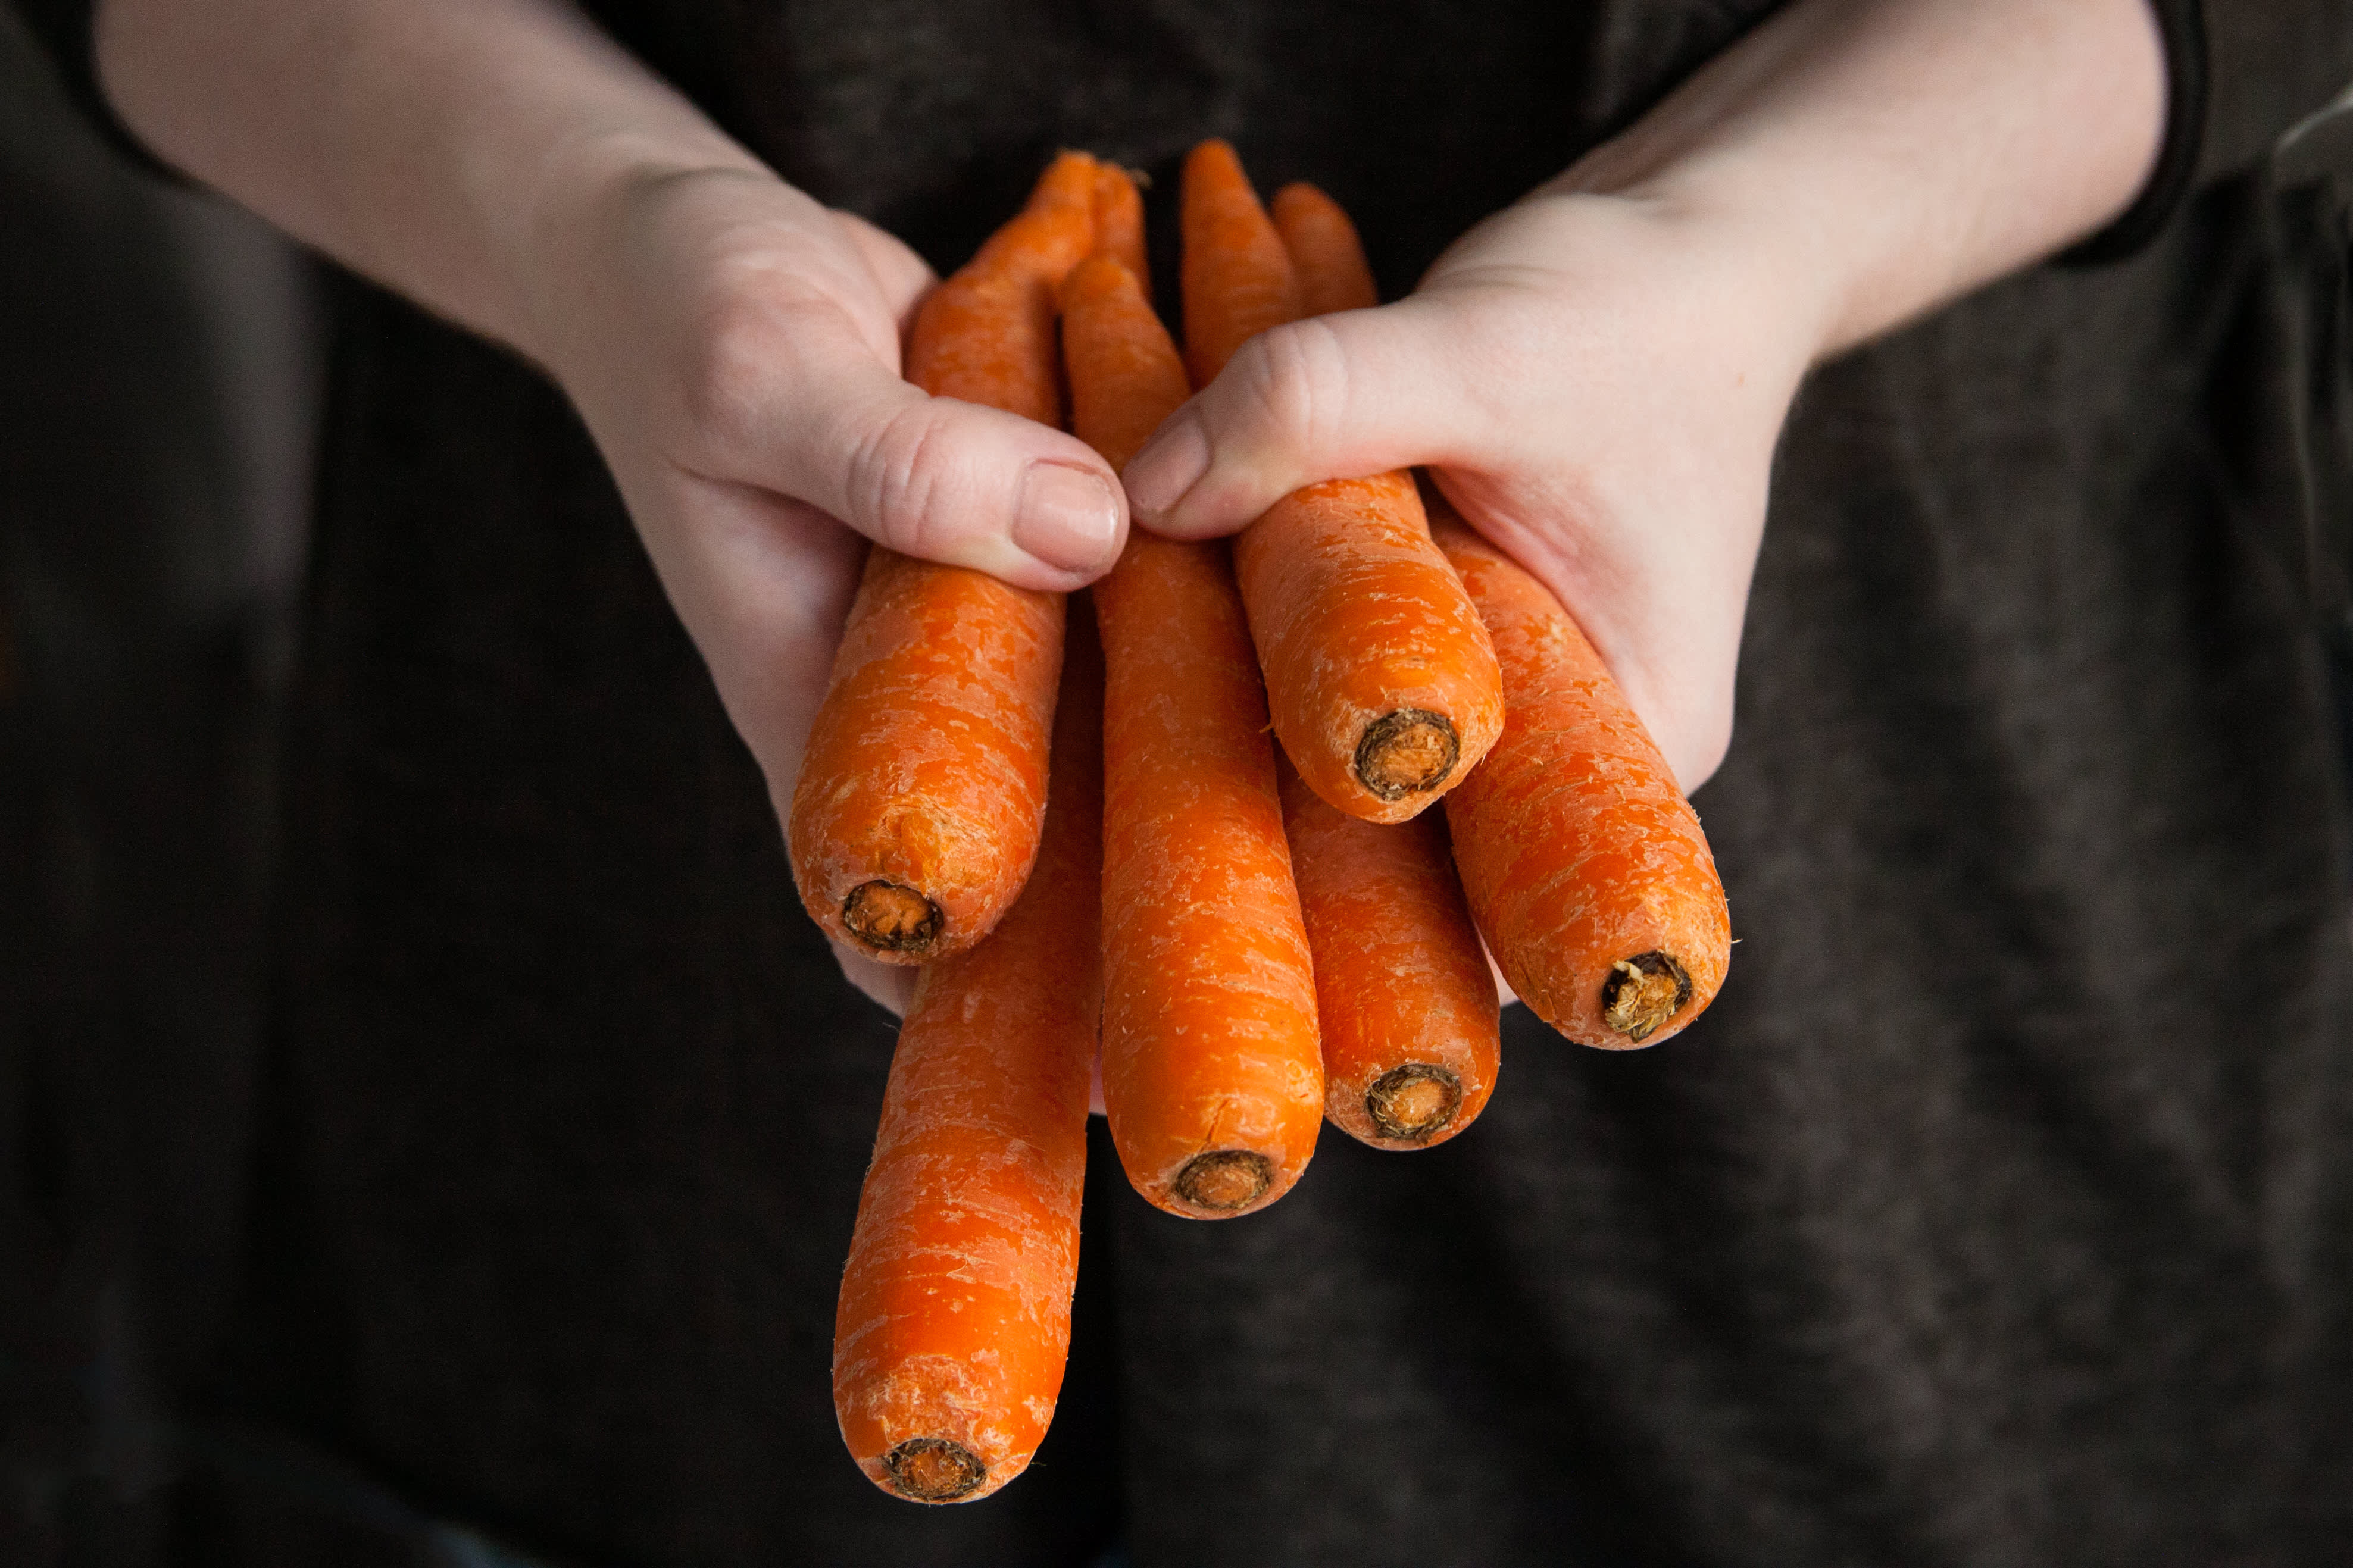 Here's What 1 Pound of Carrots Looks Like